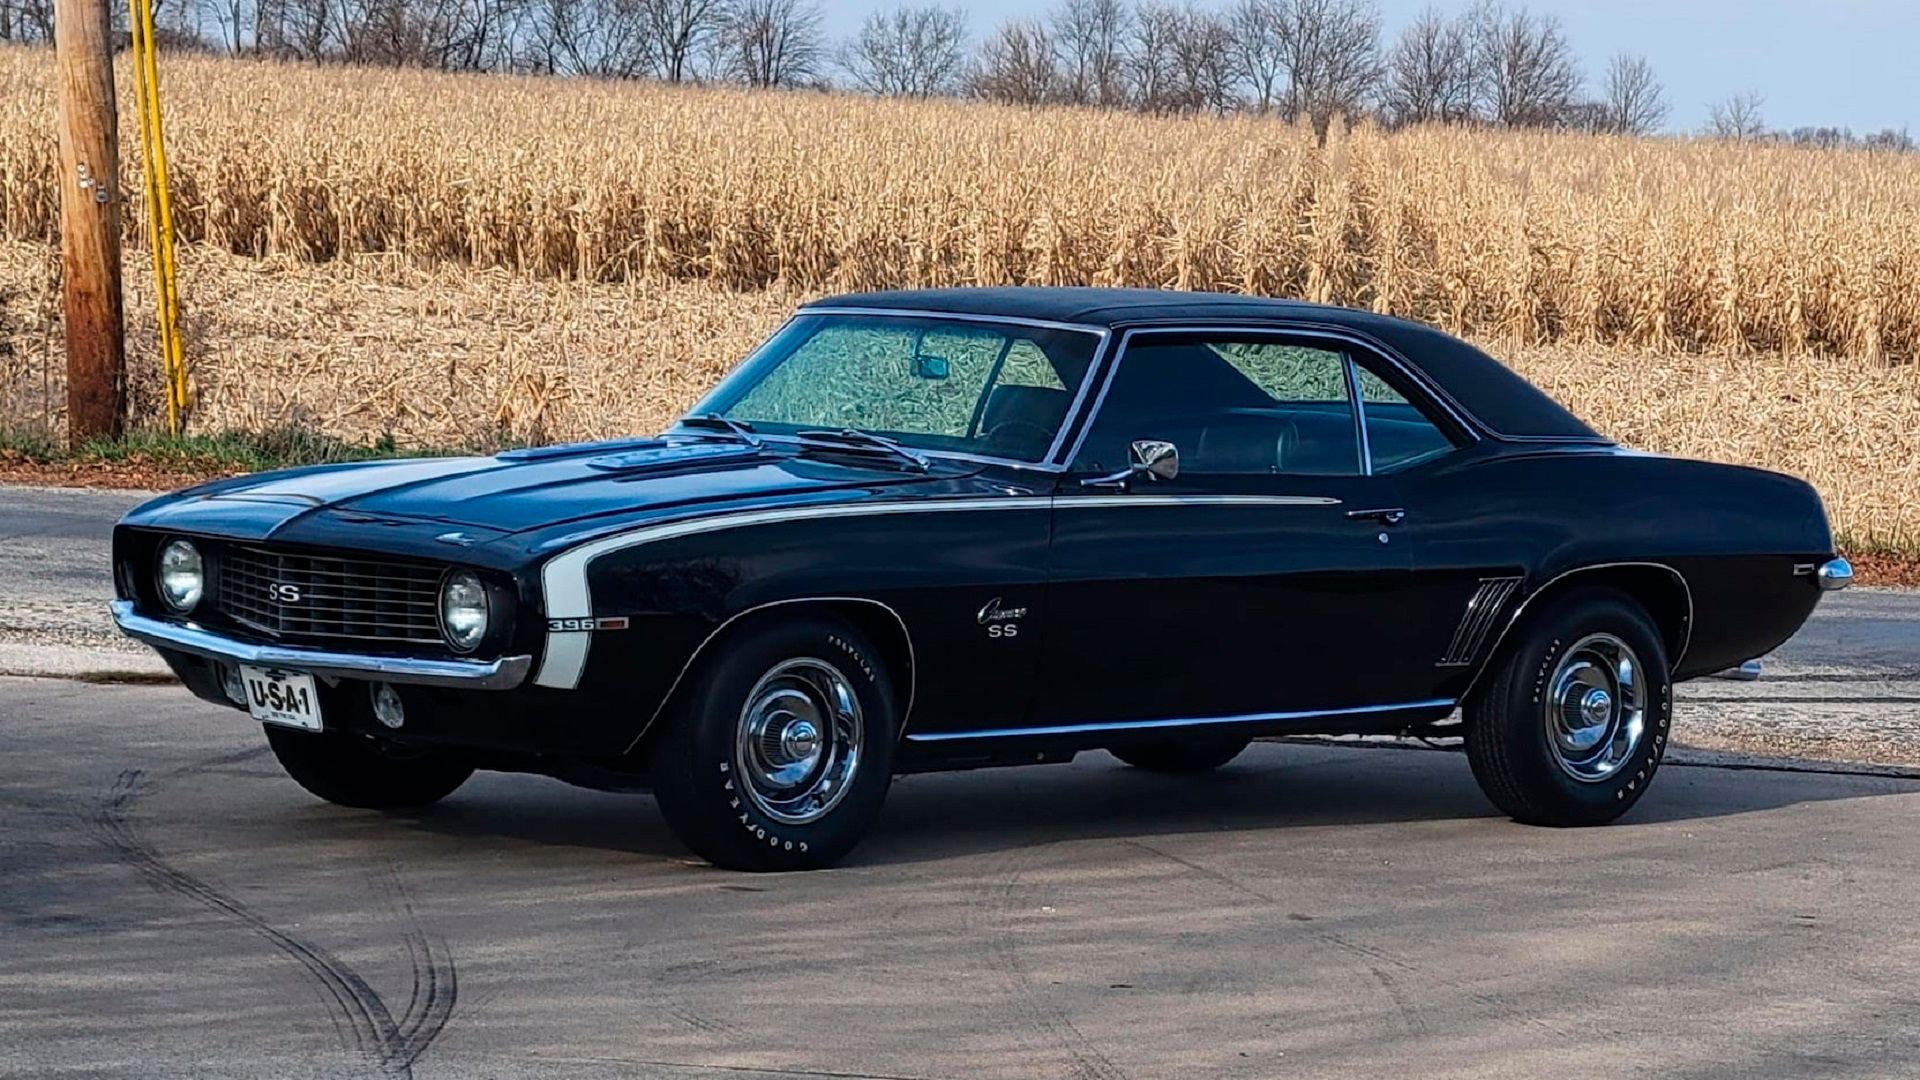 A parked 1969 Chevrolet Camaro SS